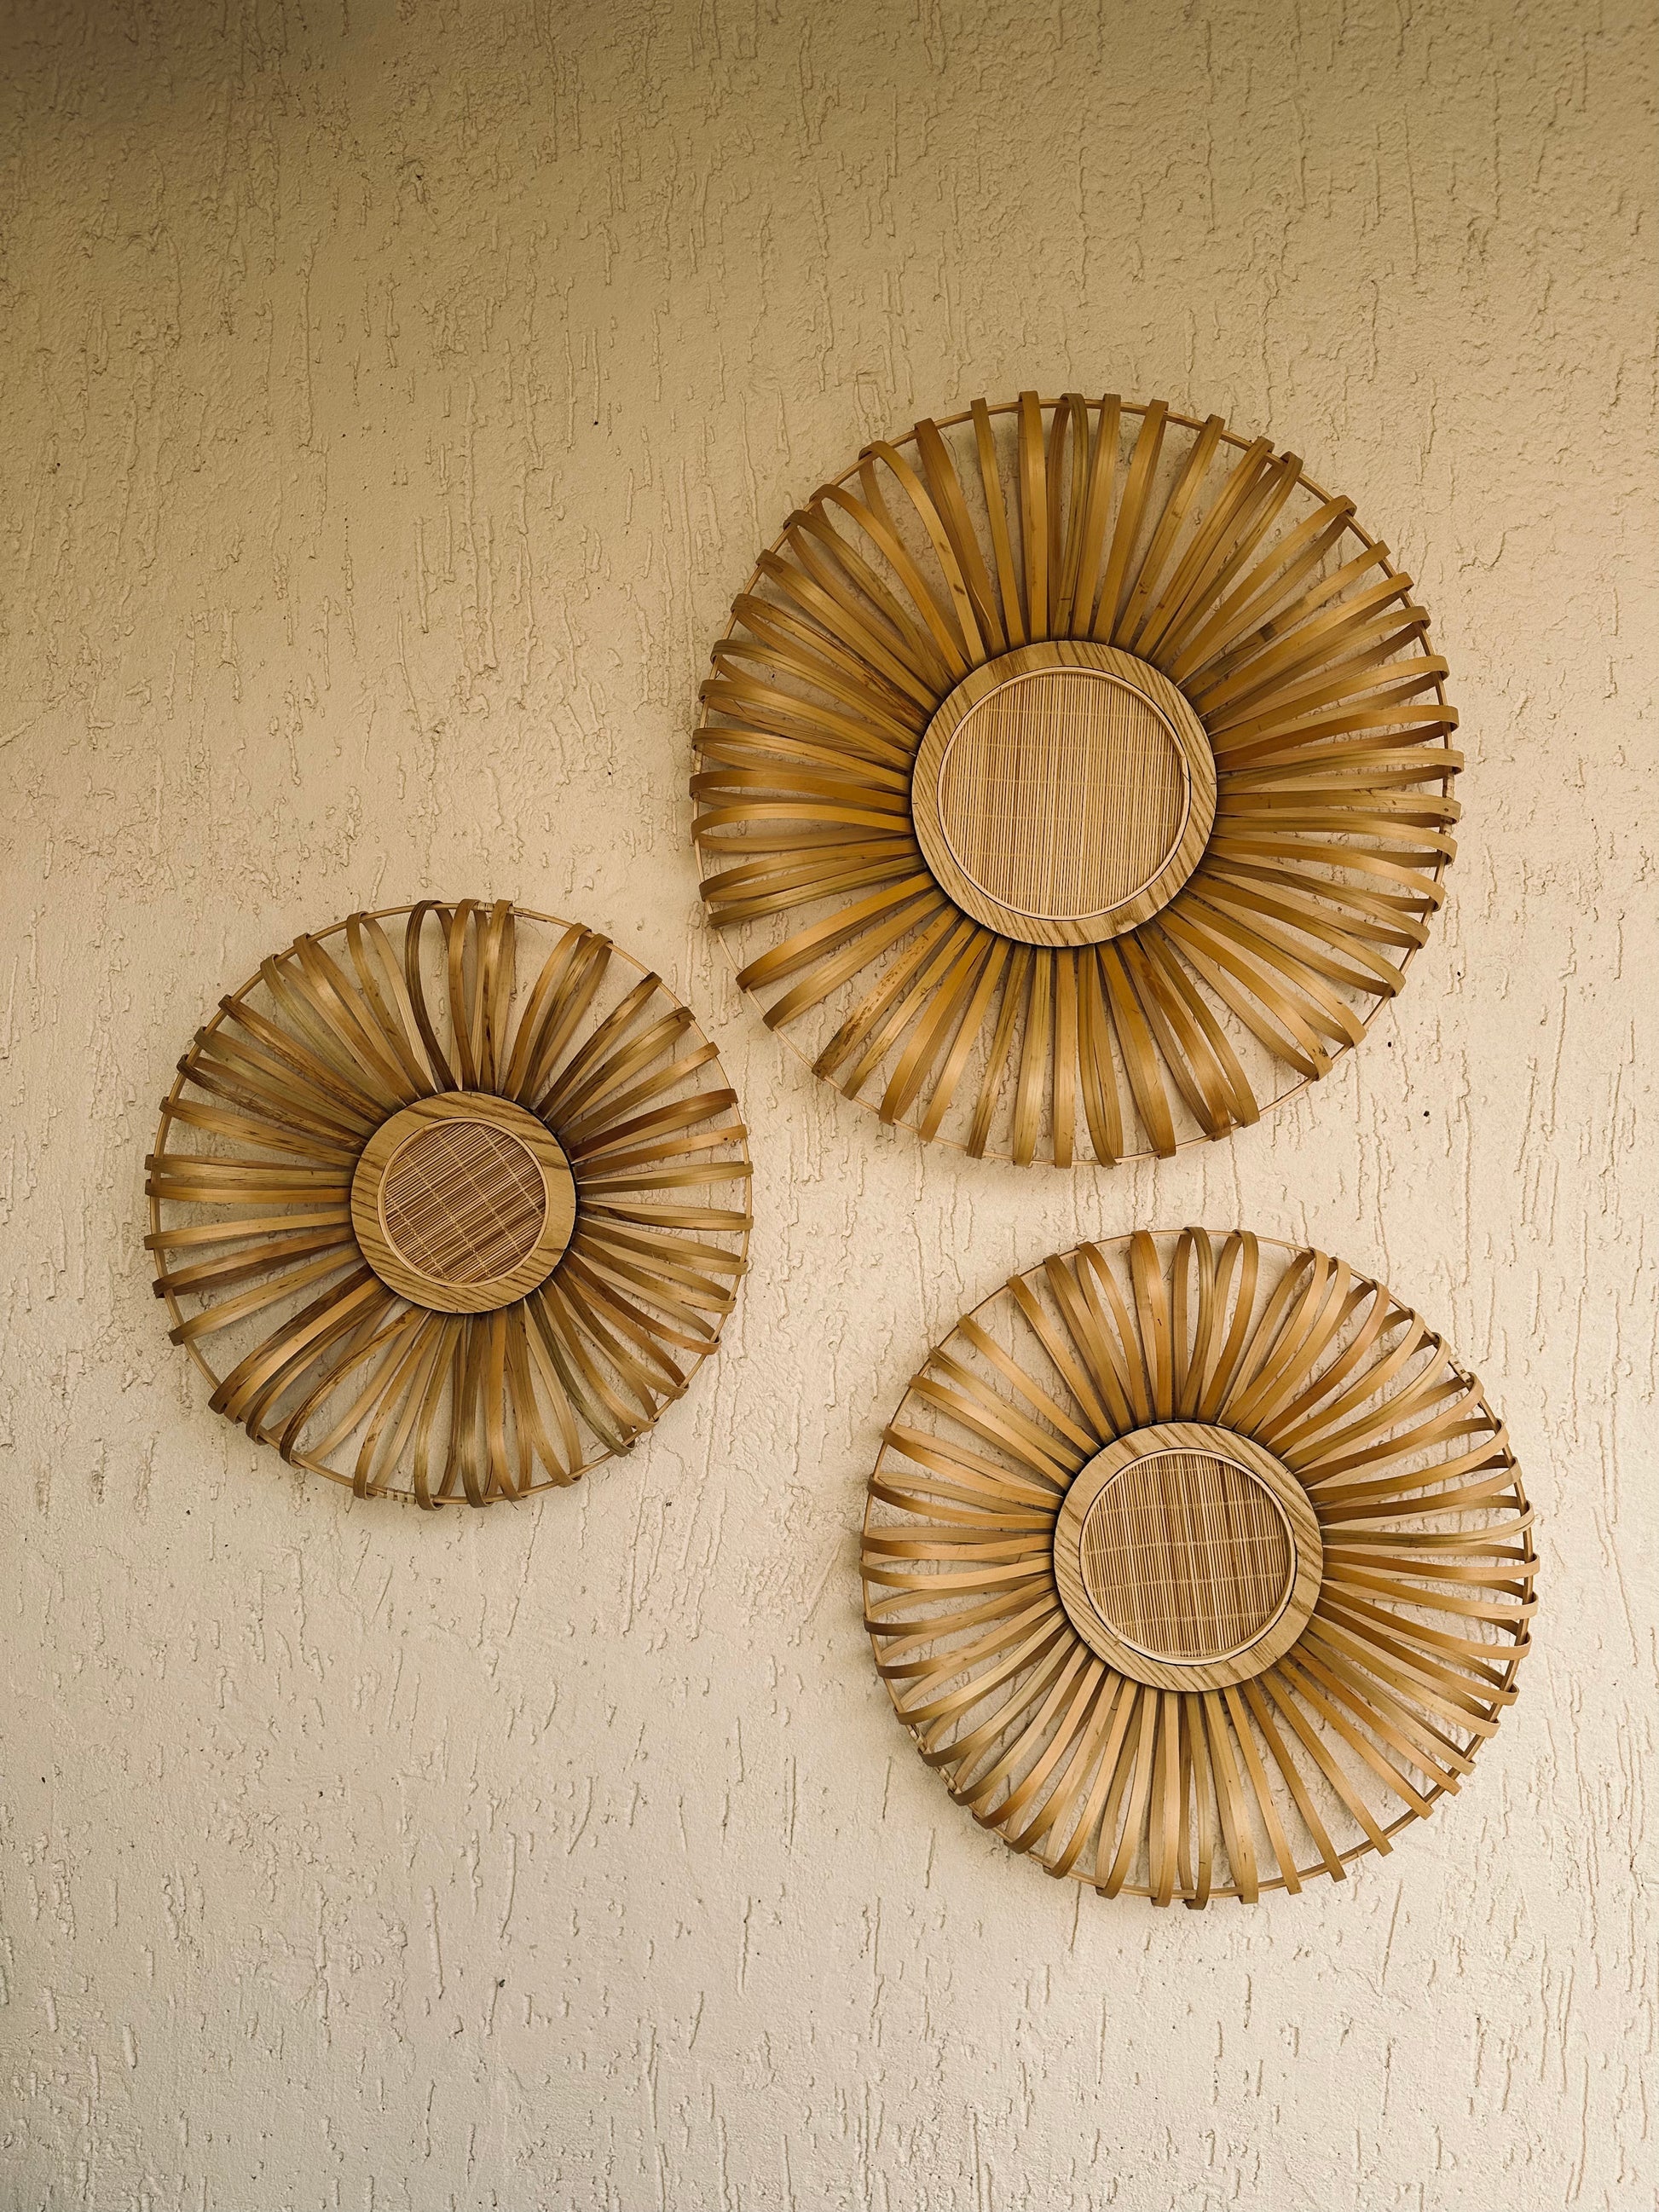 Enhance your Dream Home with our curated selection of premium Home Décor items. This bamboo wall decor which creates a geometric modern bohemian effect to any room  It is incredibly versatile and the beautiful design and finish truly lights up any room. This Boho wall deocr is also very lightweight and easy to hang. tesu